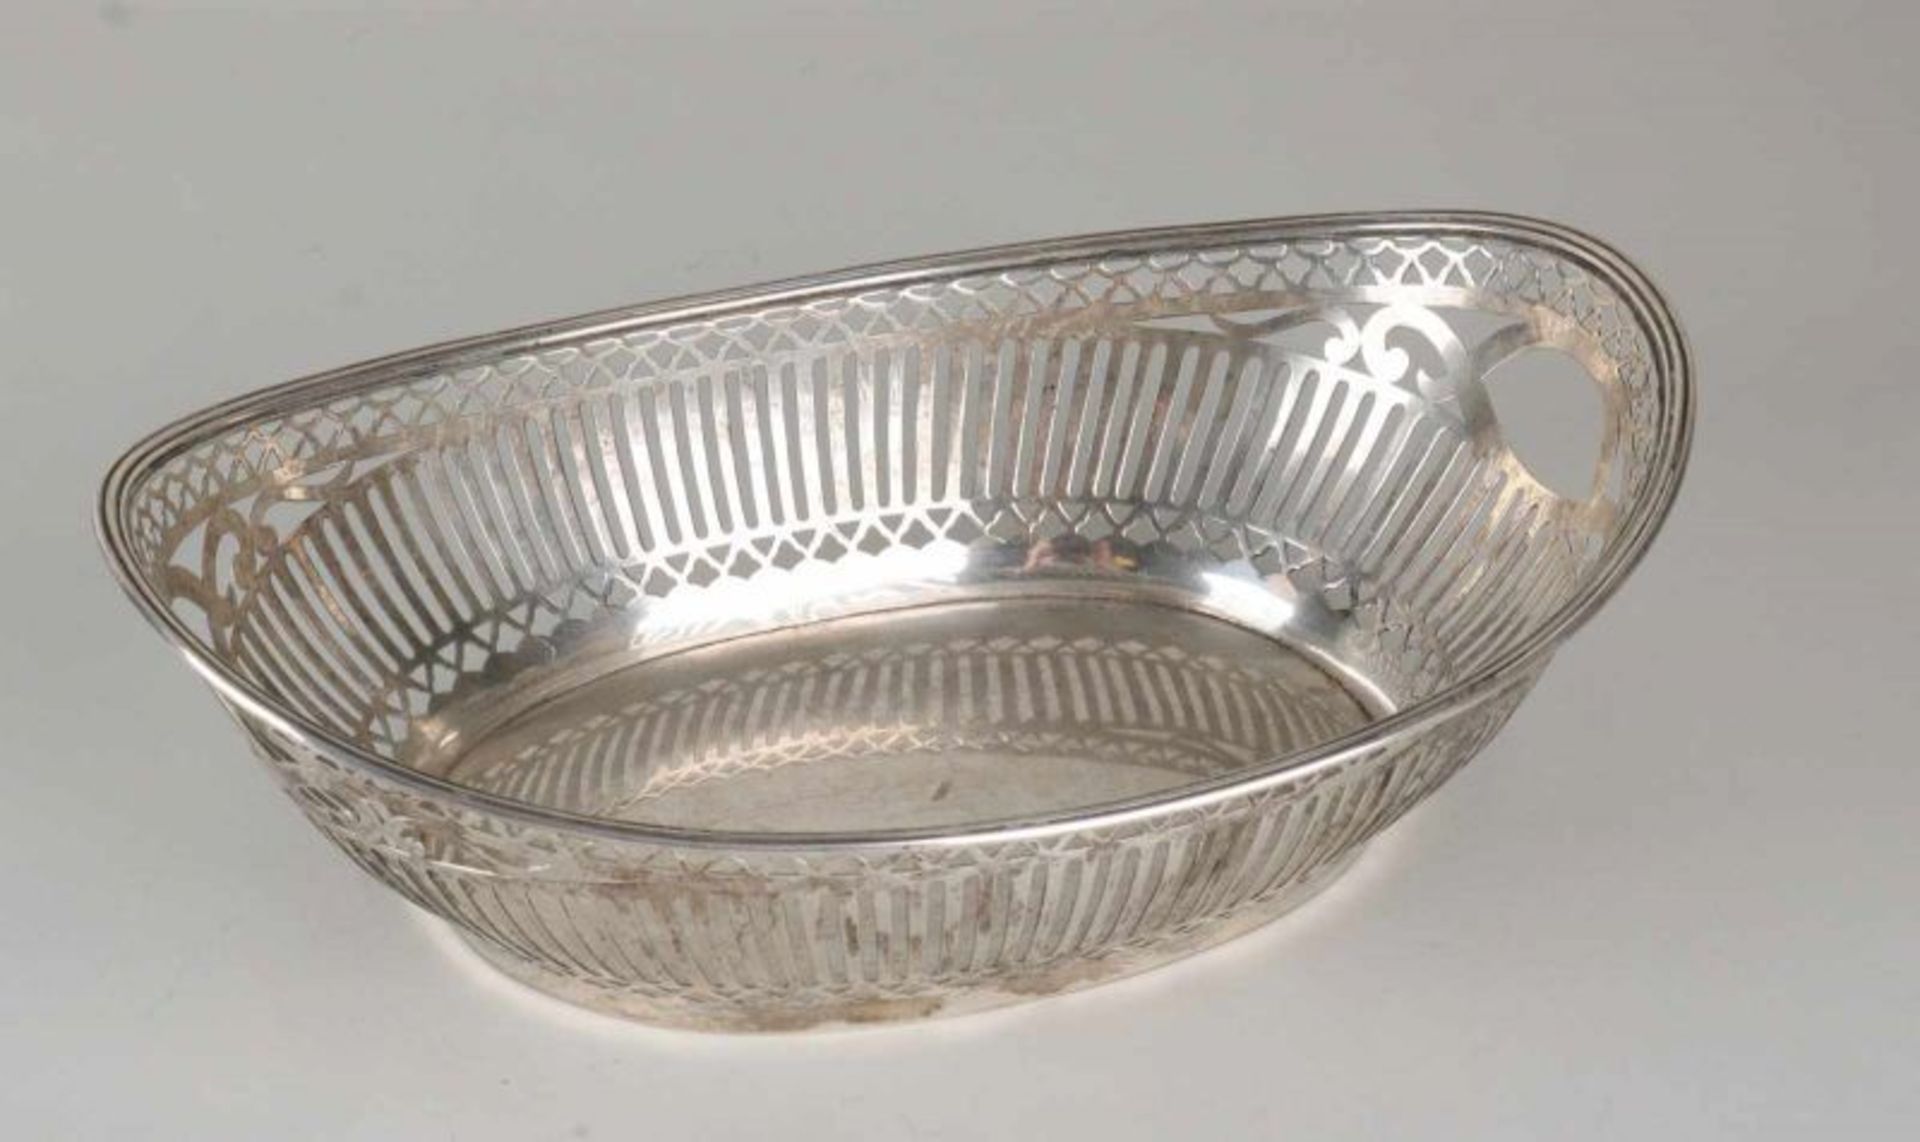 Silver bread basket, 835/000, oval model with sawn pattern with bars and contoured triangles, with